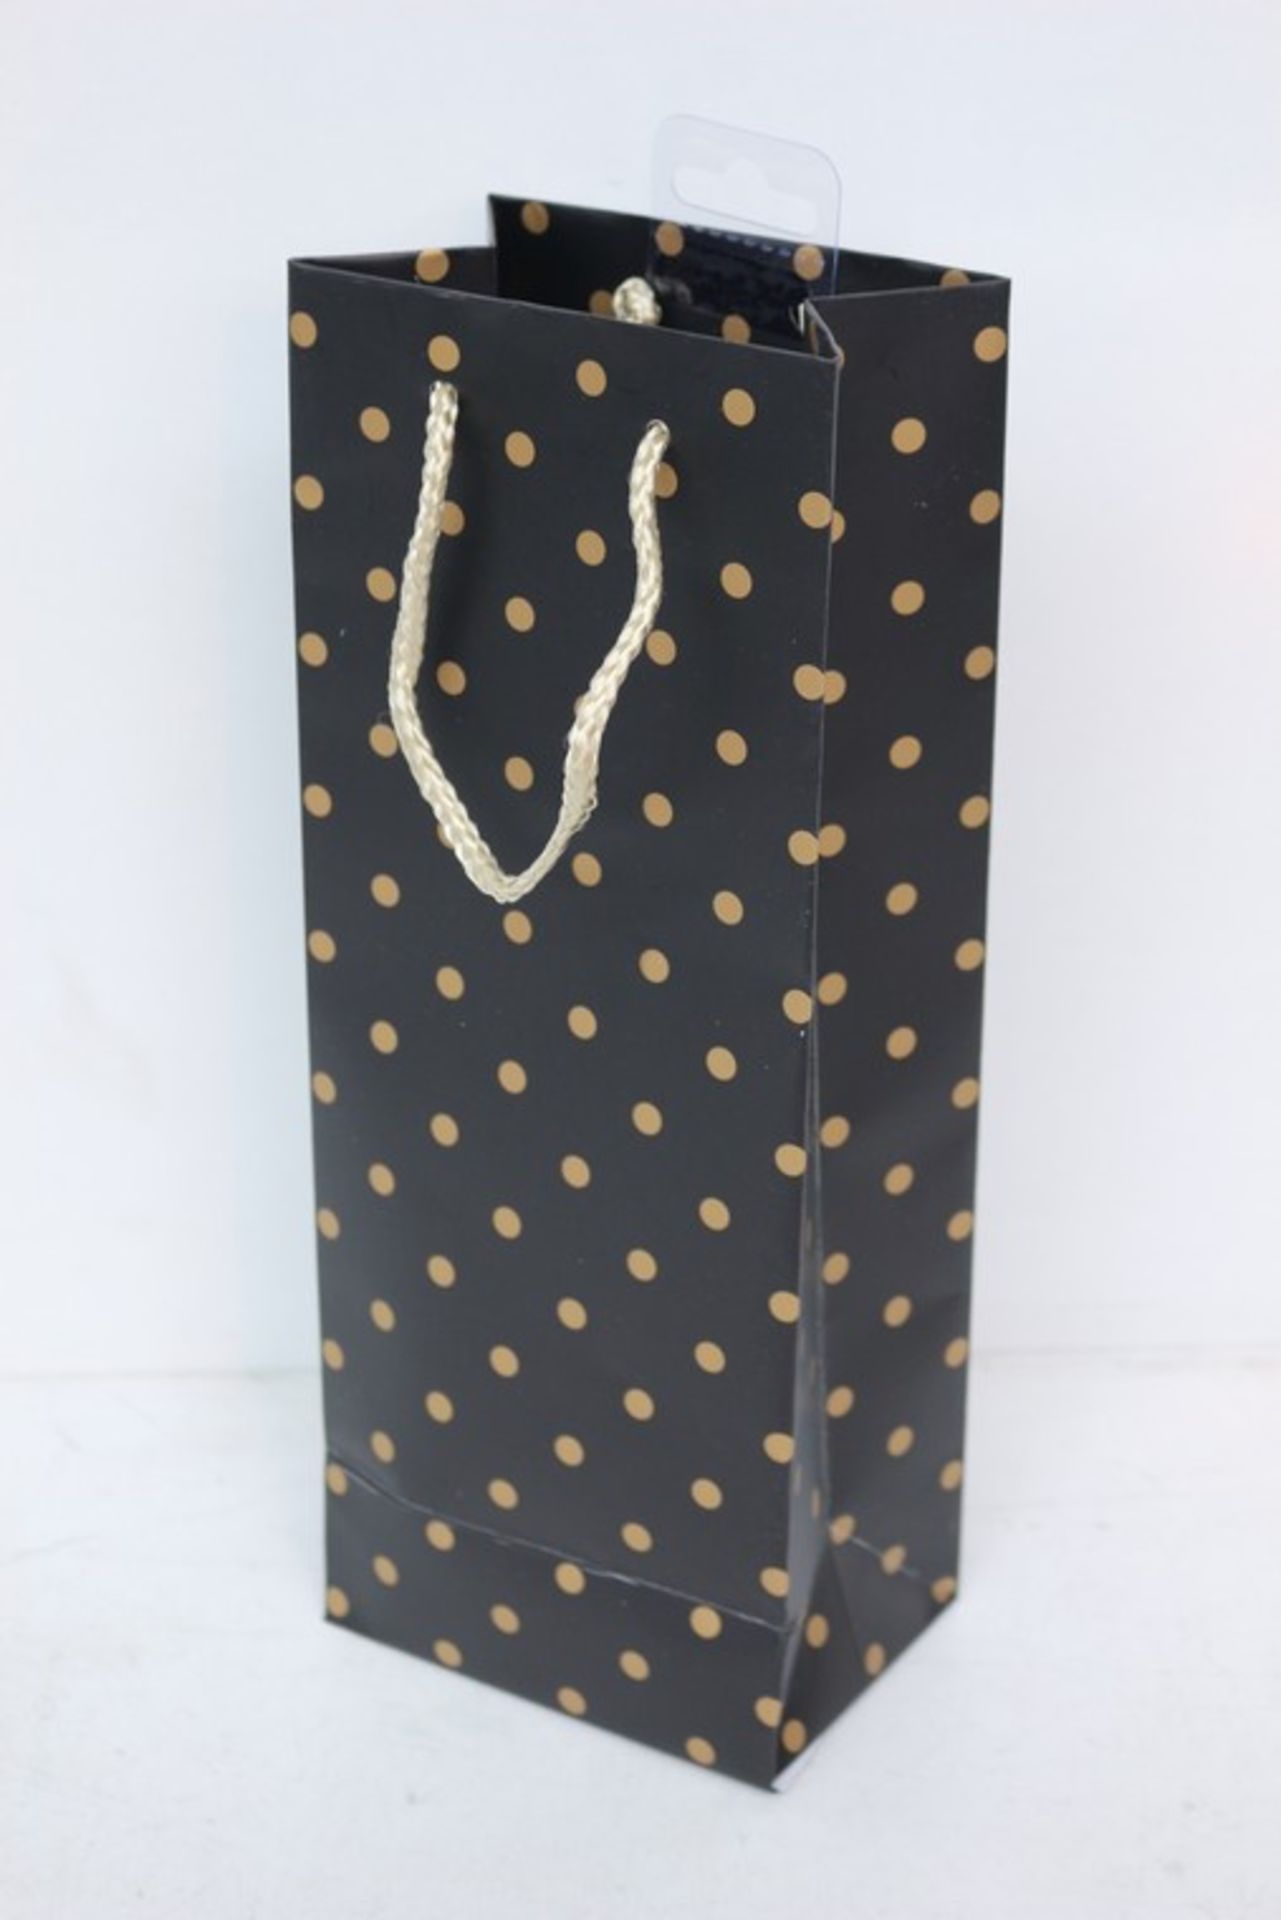 5 x BAGS EACH CONTAINING 12 BLACK BOTTLE BAGS WITH GOLD POLKA DOTS *PLEASE NOTE THAT THE BID PRICE